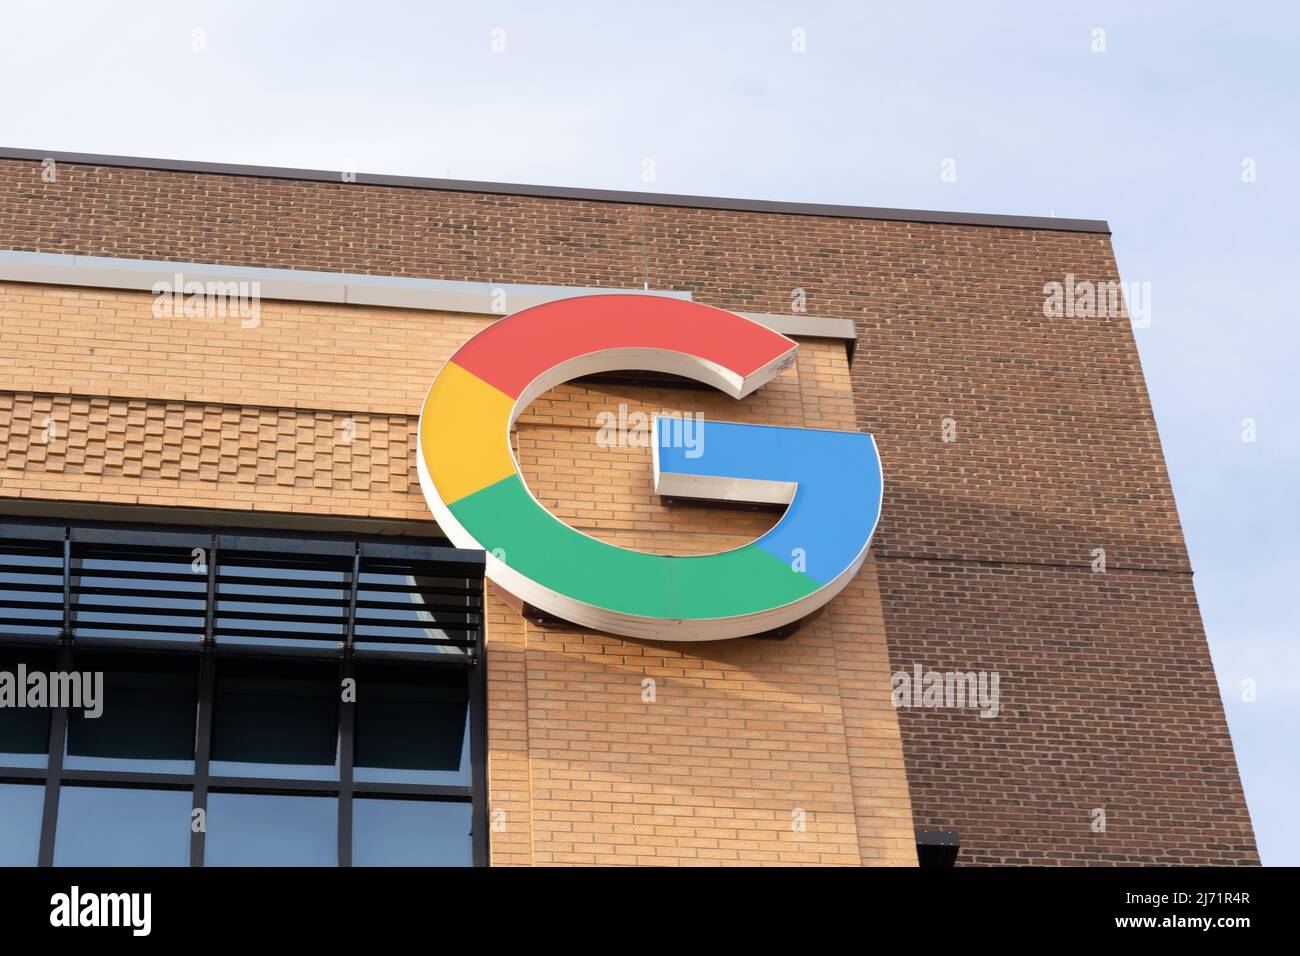 Detroit, Michigan, USA - December 26, 2021: A close up of Google logo sign on the building. Stock Photo